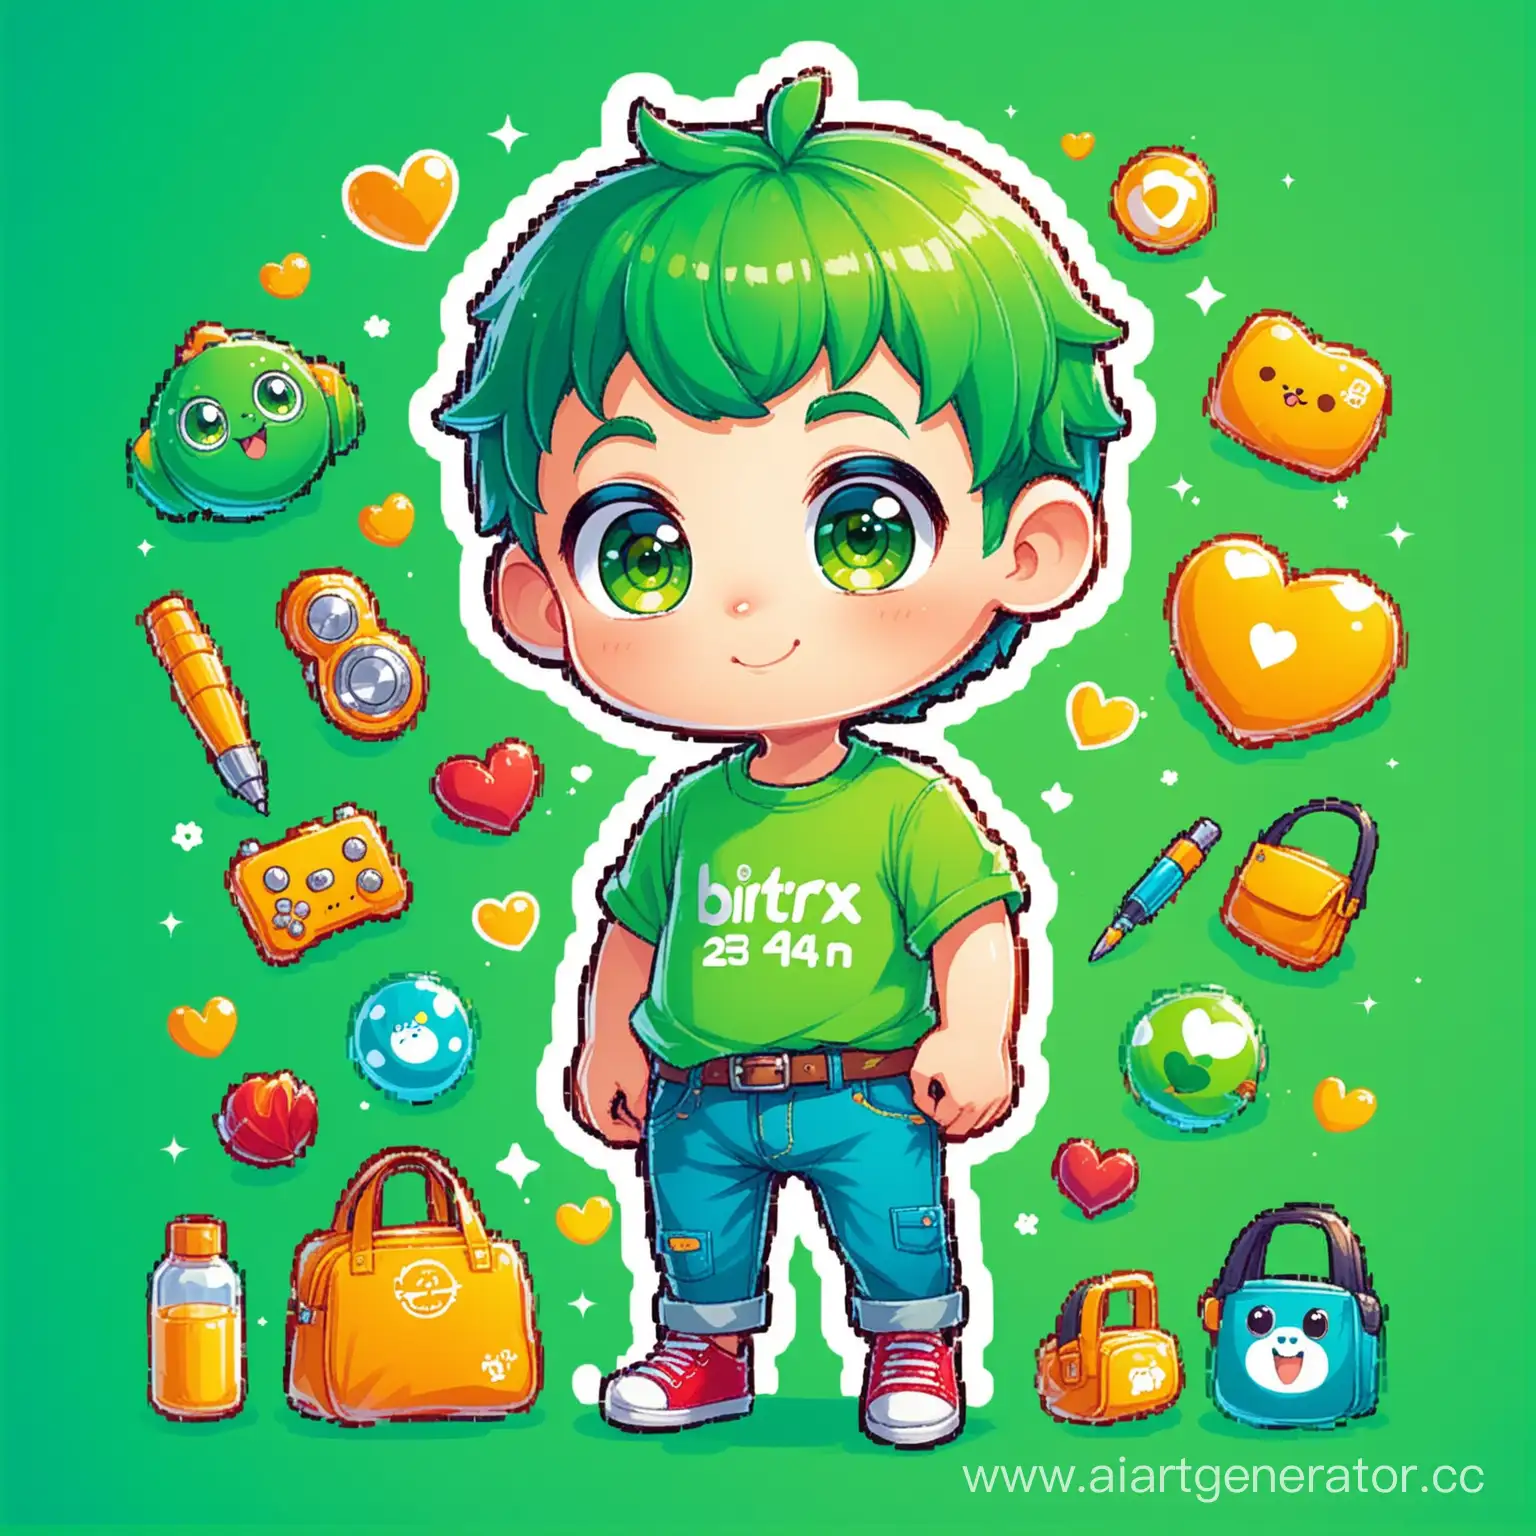 Cheerful-Cartoon-Character-Bitrix24-Boom-with-Bright-Green-Hair-and-Bitrix24themed-Clothing